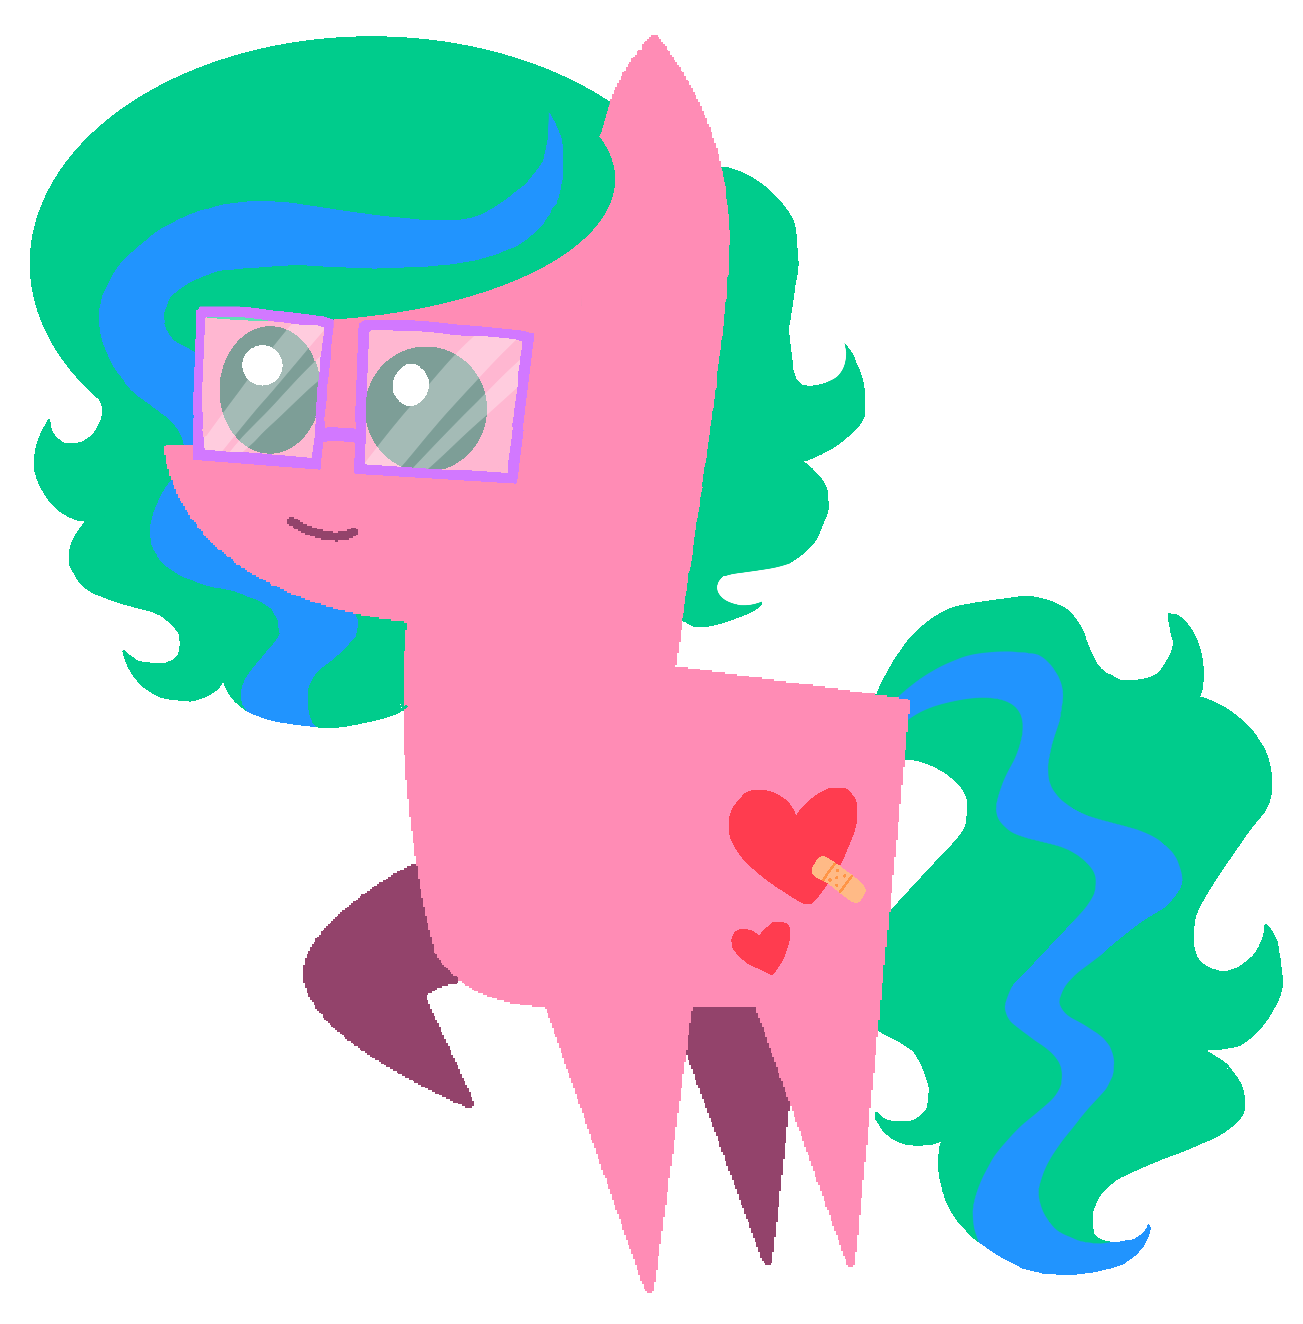 an edit of Softheart in the style of the paper cut outs from the MLP song BBBFF